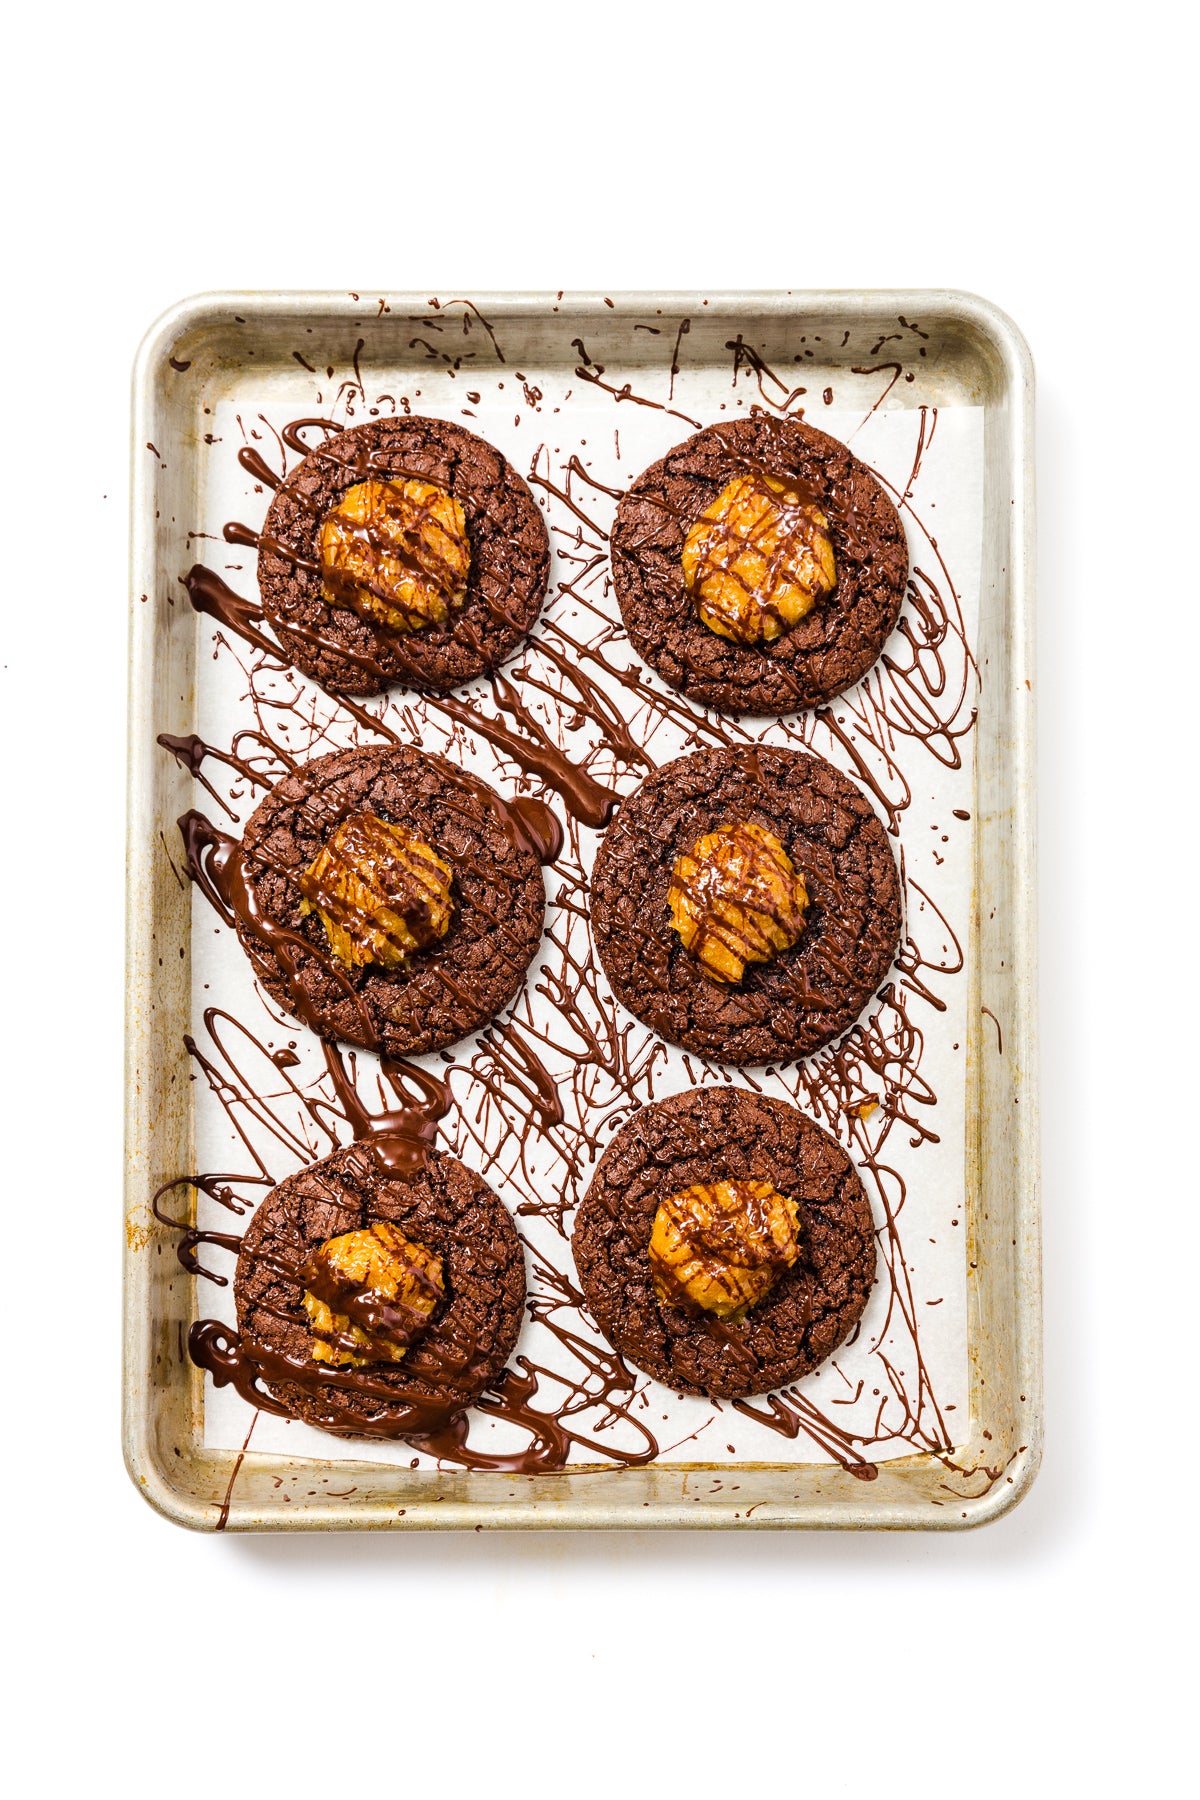 Image of top of baking sheet with six final Miss Jones Baking Co Coconut Caramel Brownie Cookies